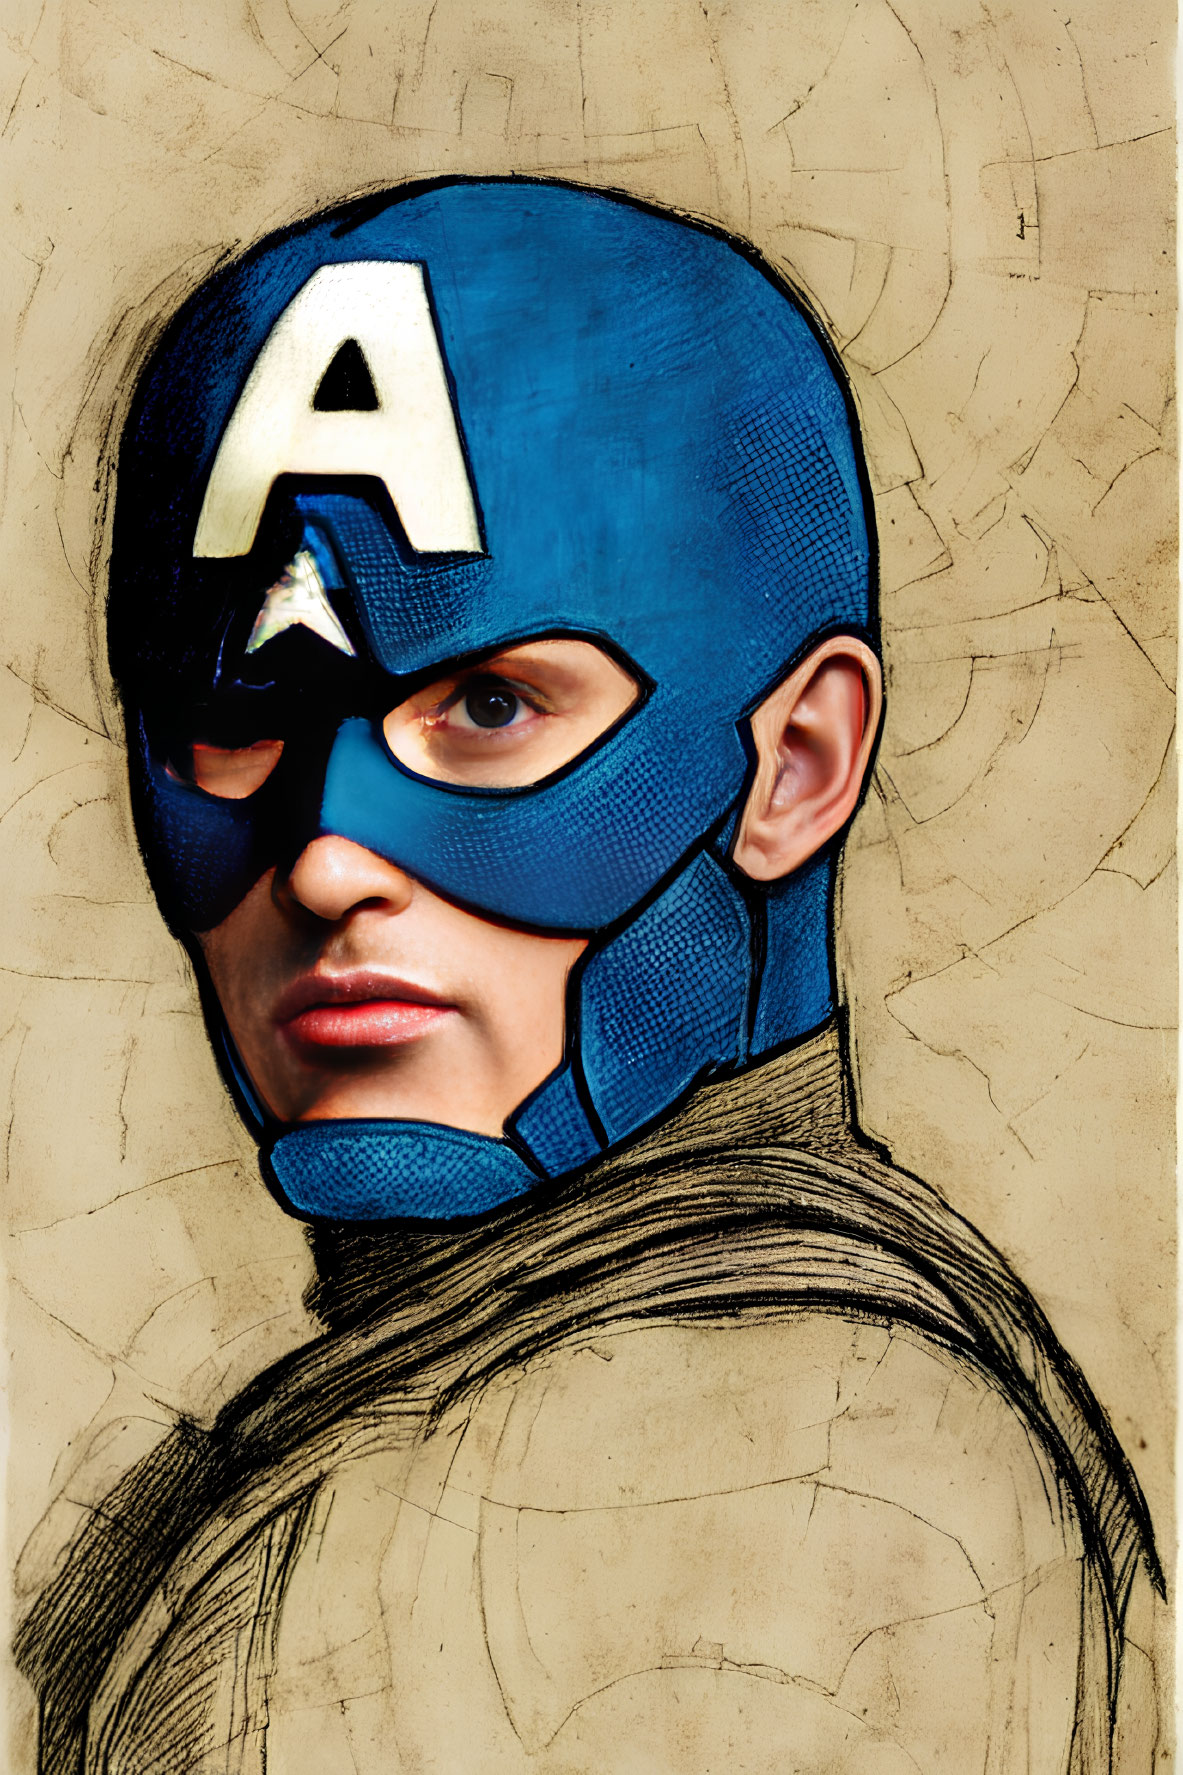 Blue Masked Person with Letter 'A' and Shield Fragment on Beige Background